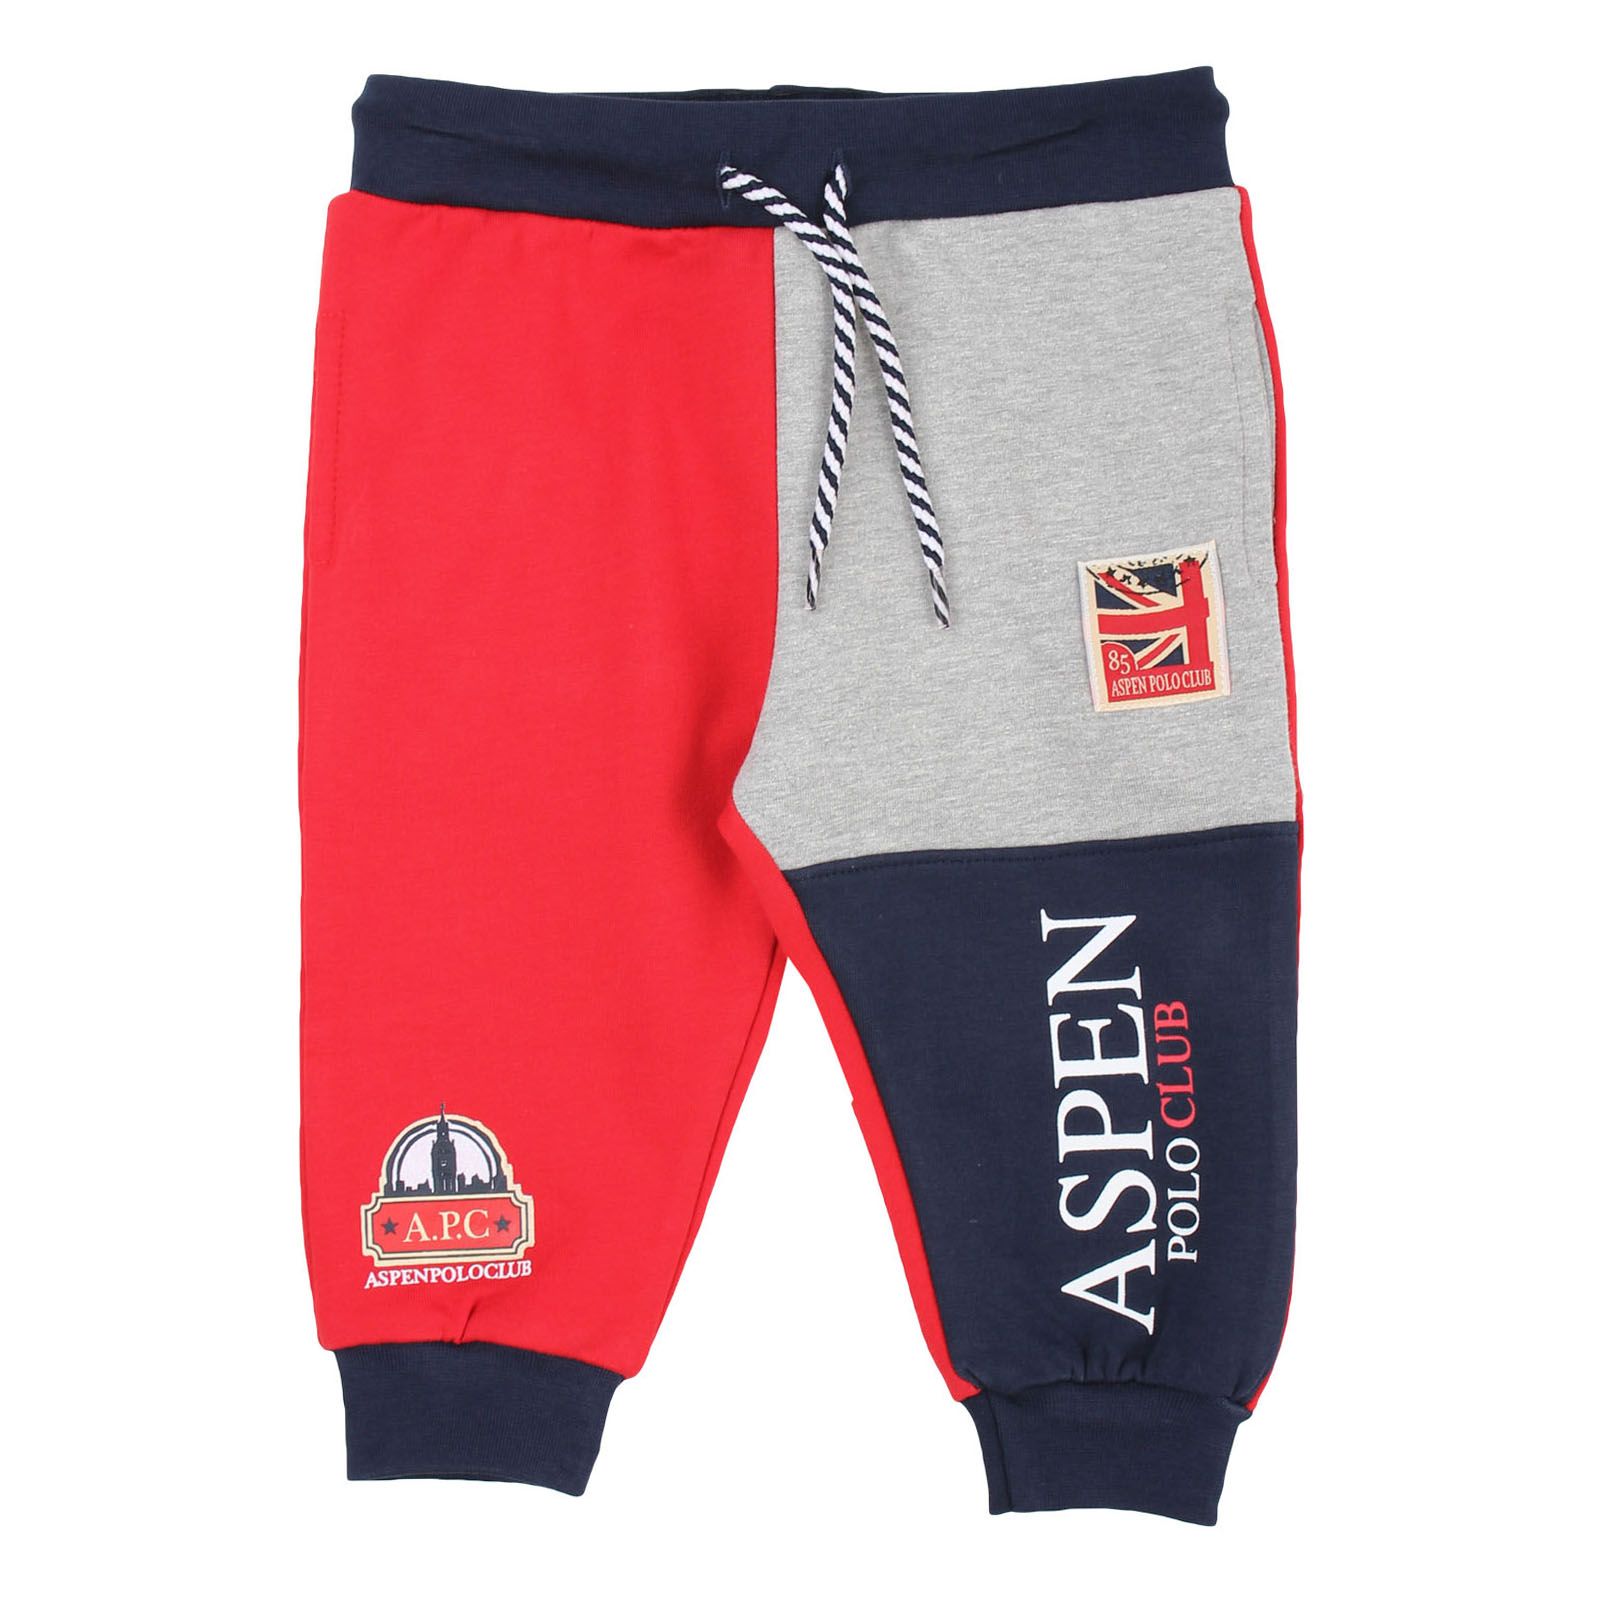 Red Aspen polo club trousers -Details fleece trousers, elastic waistband with hidden drawstring to tie in the center, tricolor, red, blue and gray, patches and logoed prints, 3 pockets, back with patterned pocket, elastic at the ankles -Wash max 30 °